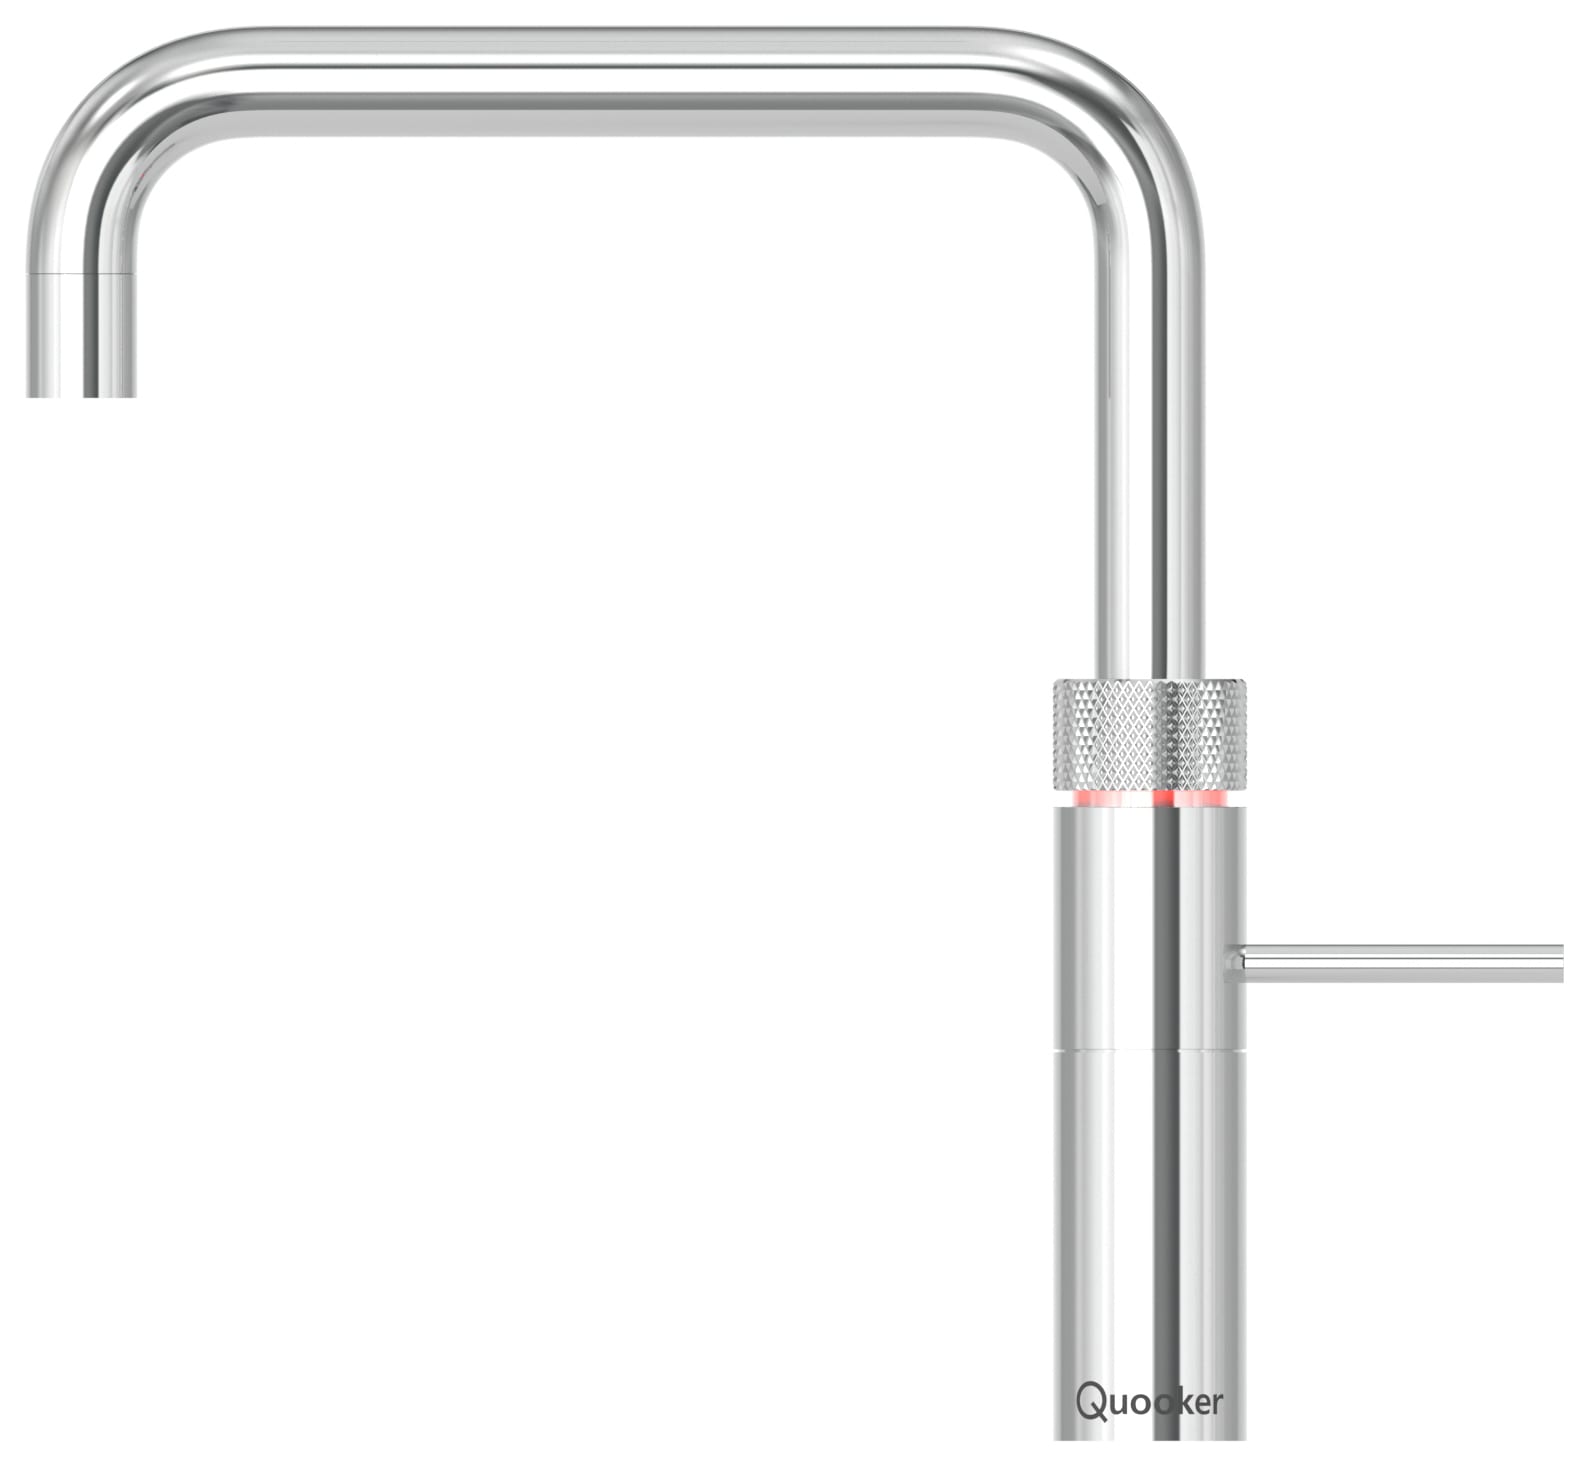 Quooker PRO3 Fusion 3-in-1 Square Neck Boiling Water